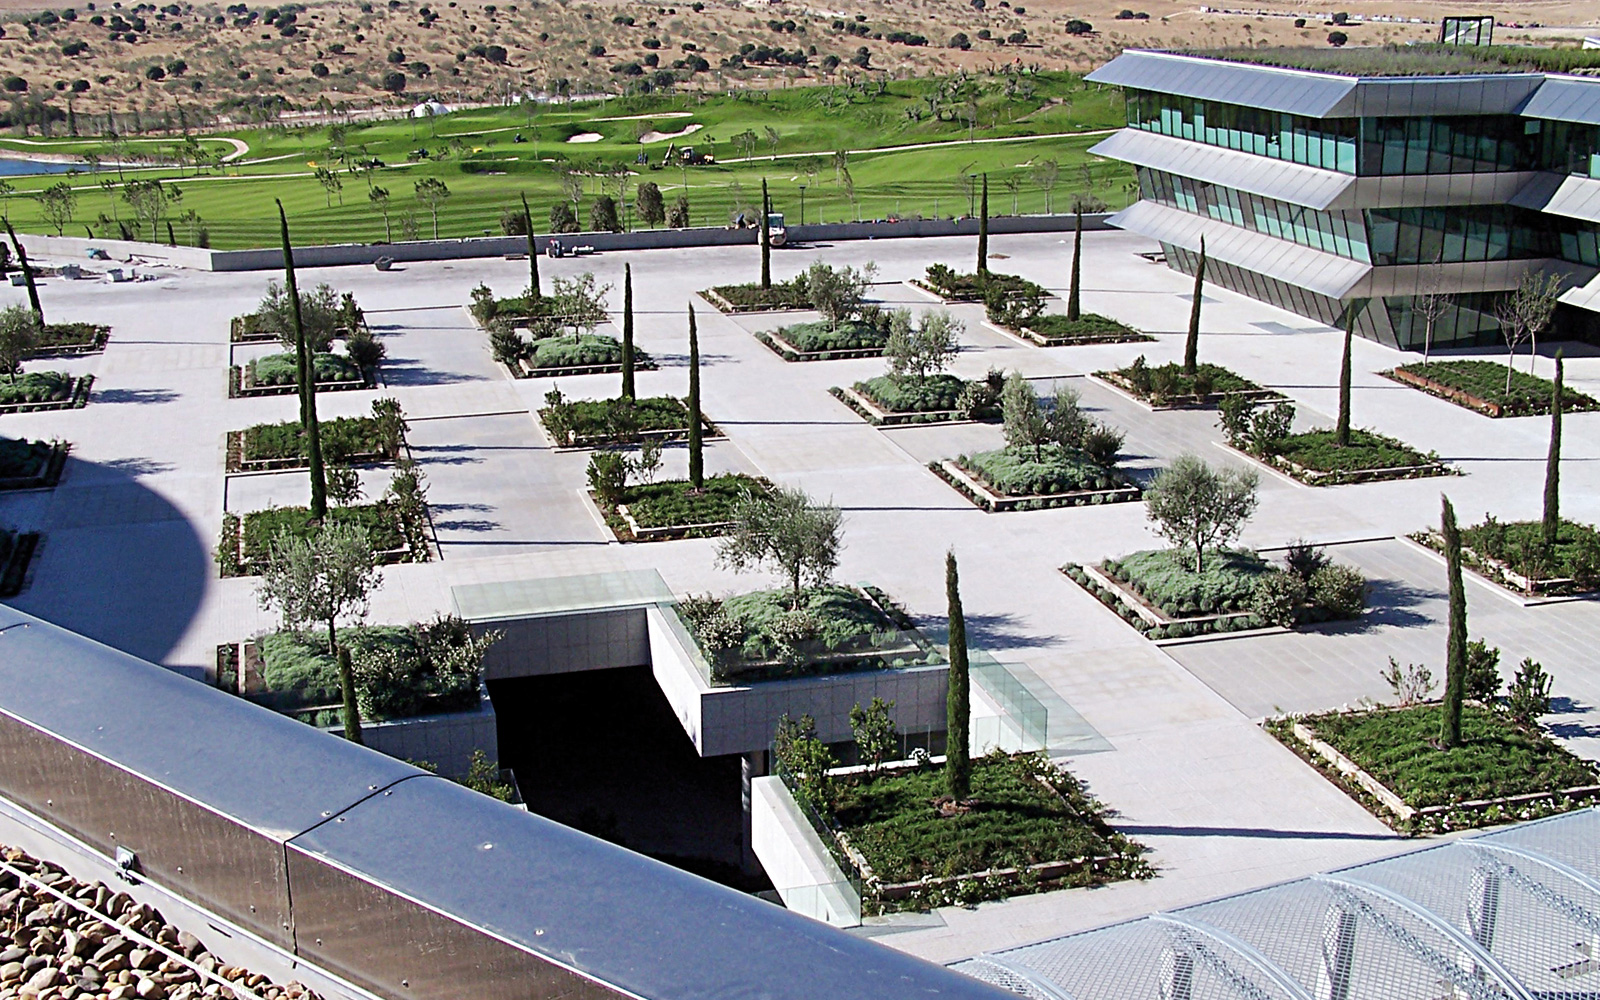 Green roof with trees and walkways